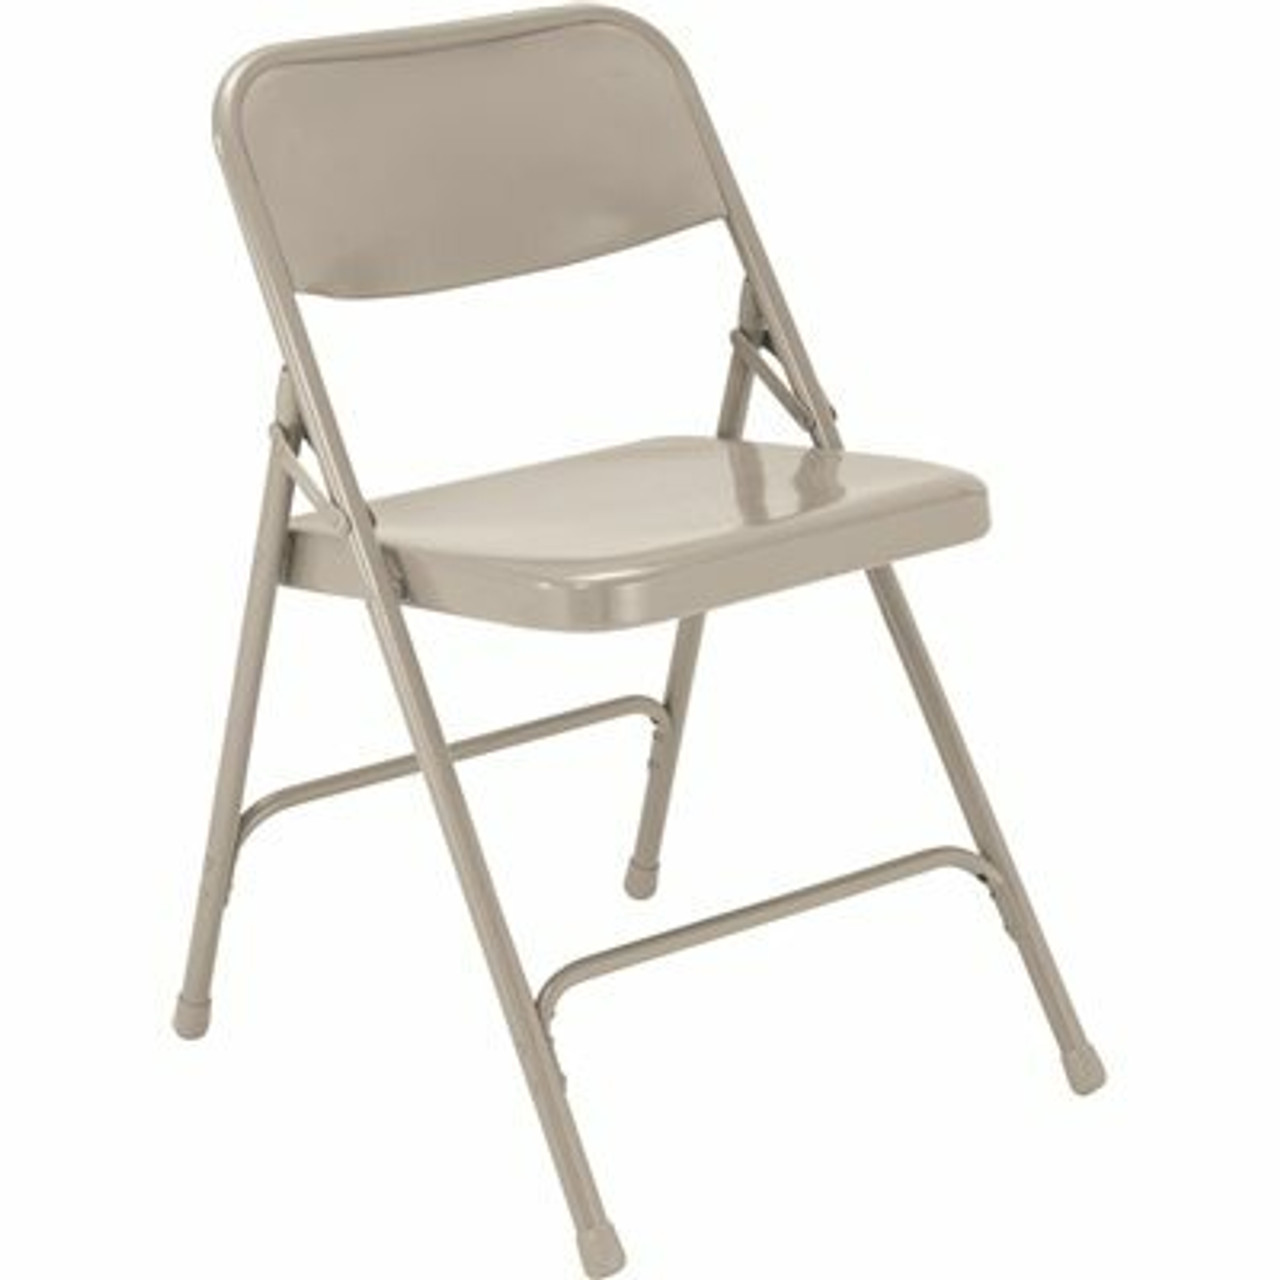 National Public Seating 200 Series Premium All-Steel Double Hinge Folding Chair, Grey (4-Pack)